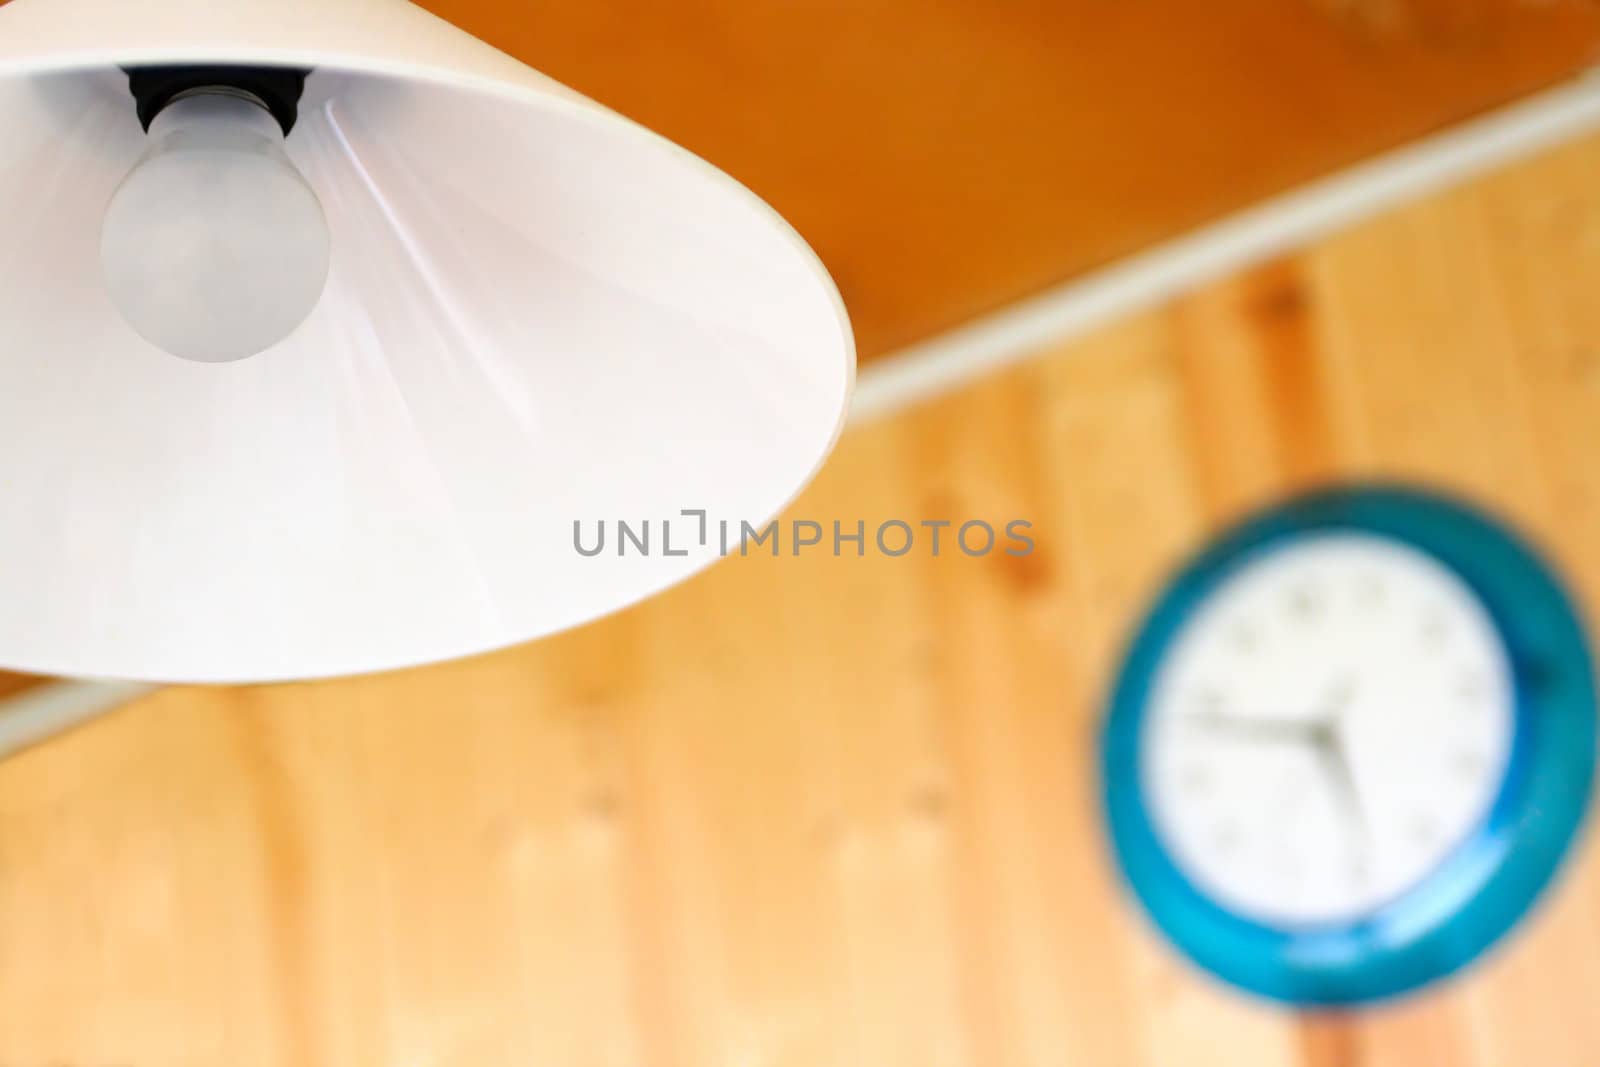 White light in the foreground and the clock in a blue body blurred in the background